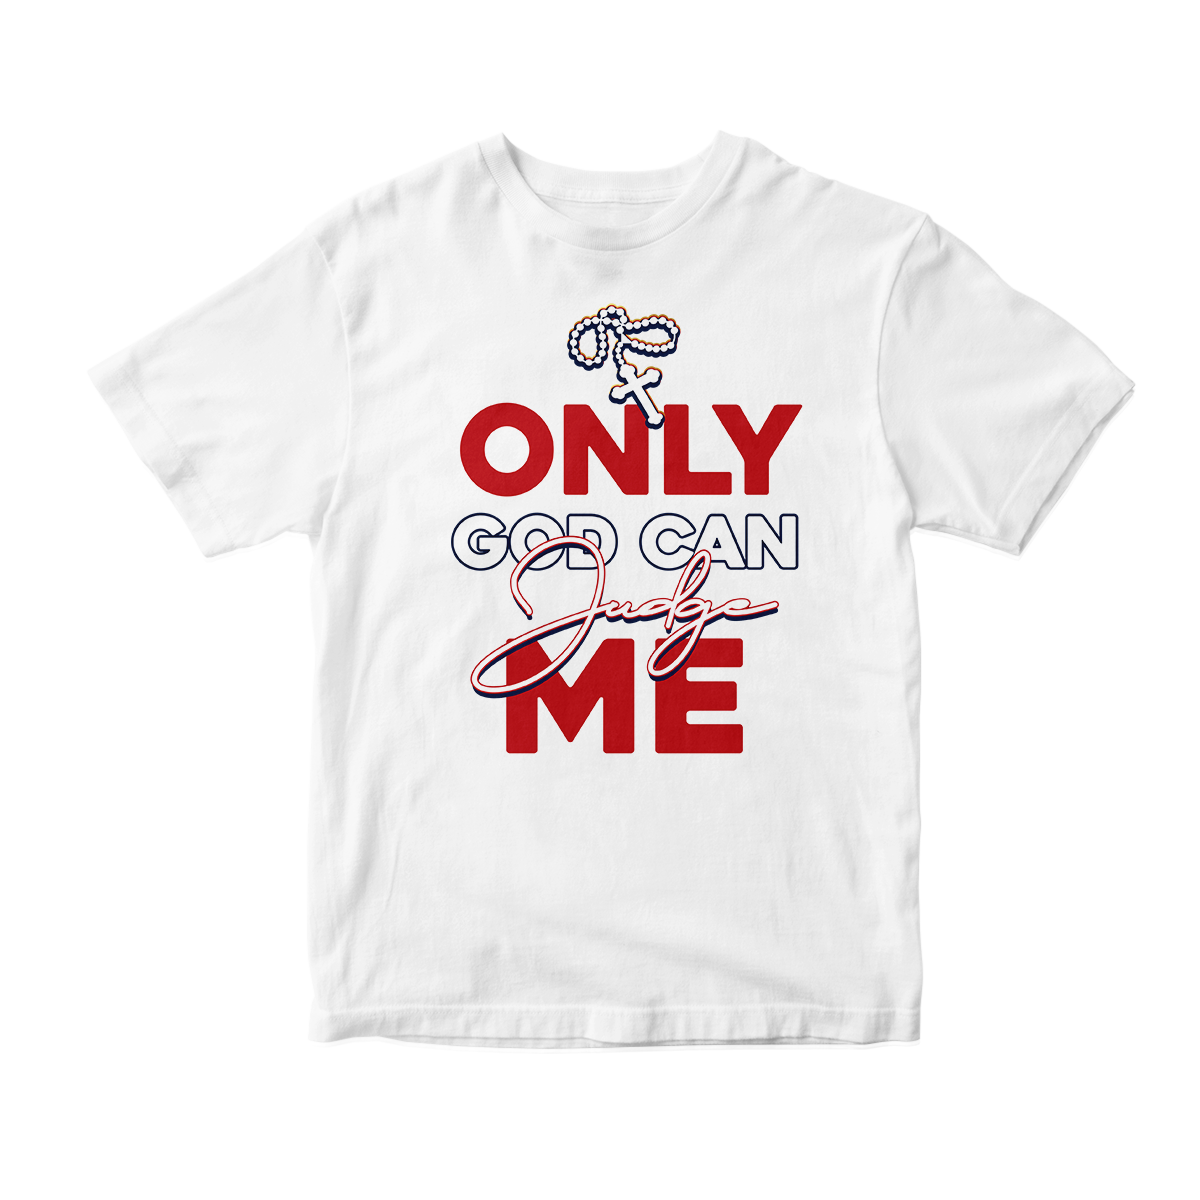 'Only God Can Judge Me' in FIBA 4 CW Unisex Short Sleeve Tee